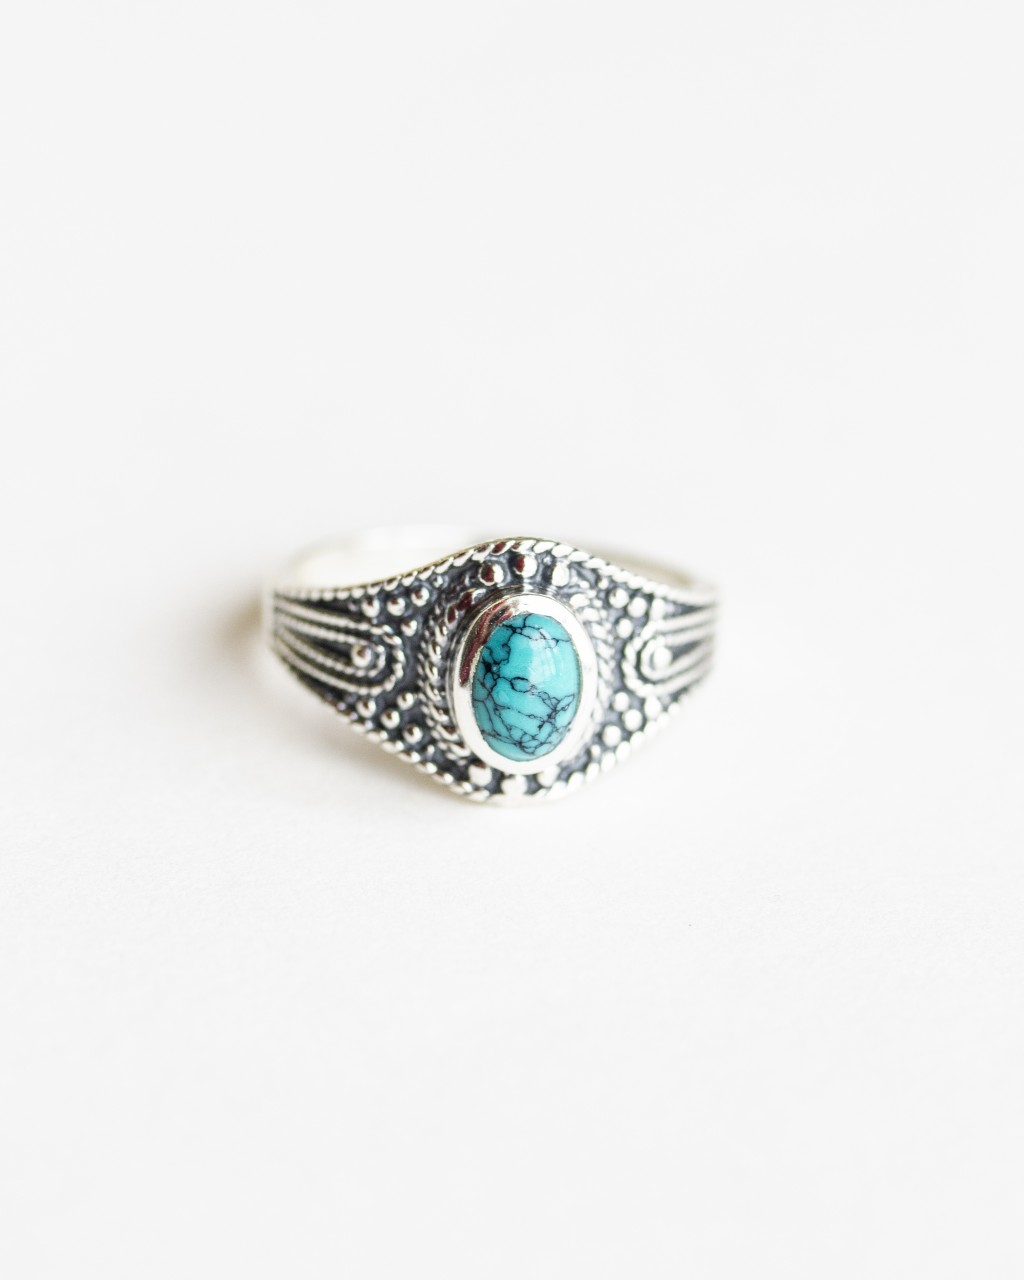 Buy Natural Turquoise Men Rings, Handmade Rings, 925 Sterling Silver,  Christmas Gift, Birthday Gift, Promise Turquoise Rings, Statement Rings.  Online in India - Etsy